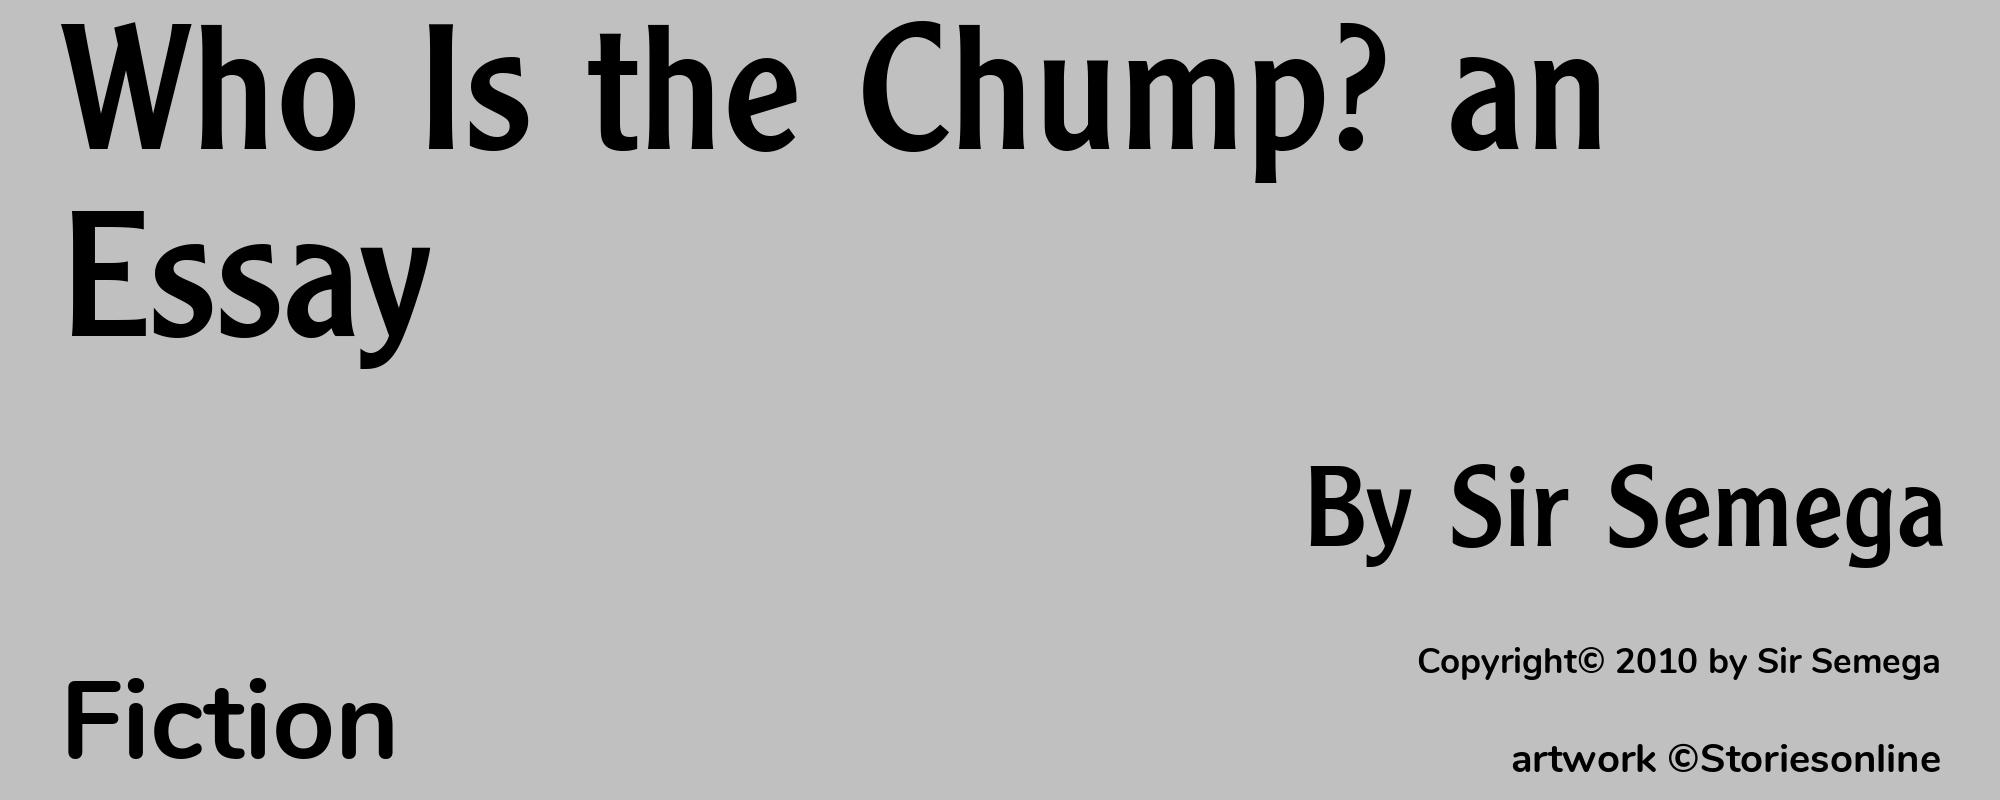 Who Is the Chump? an Essay - Cover